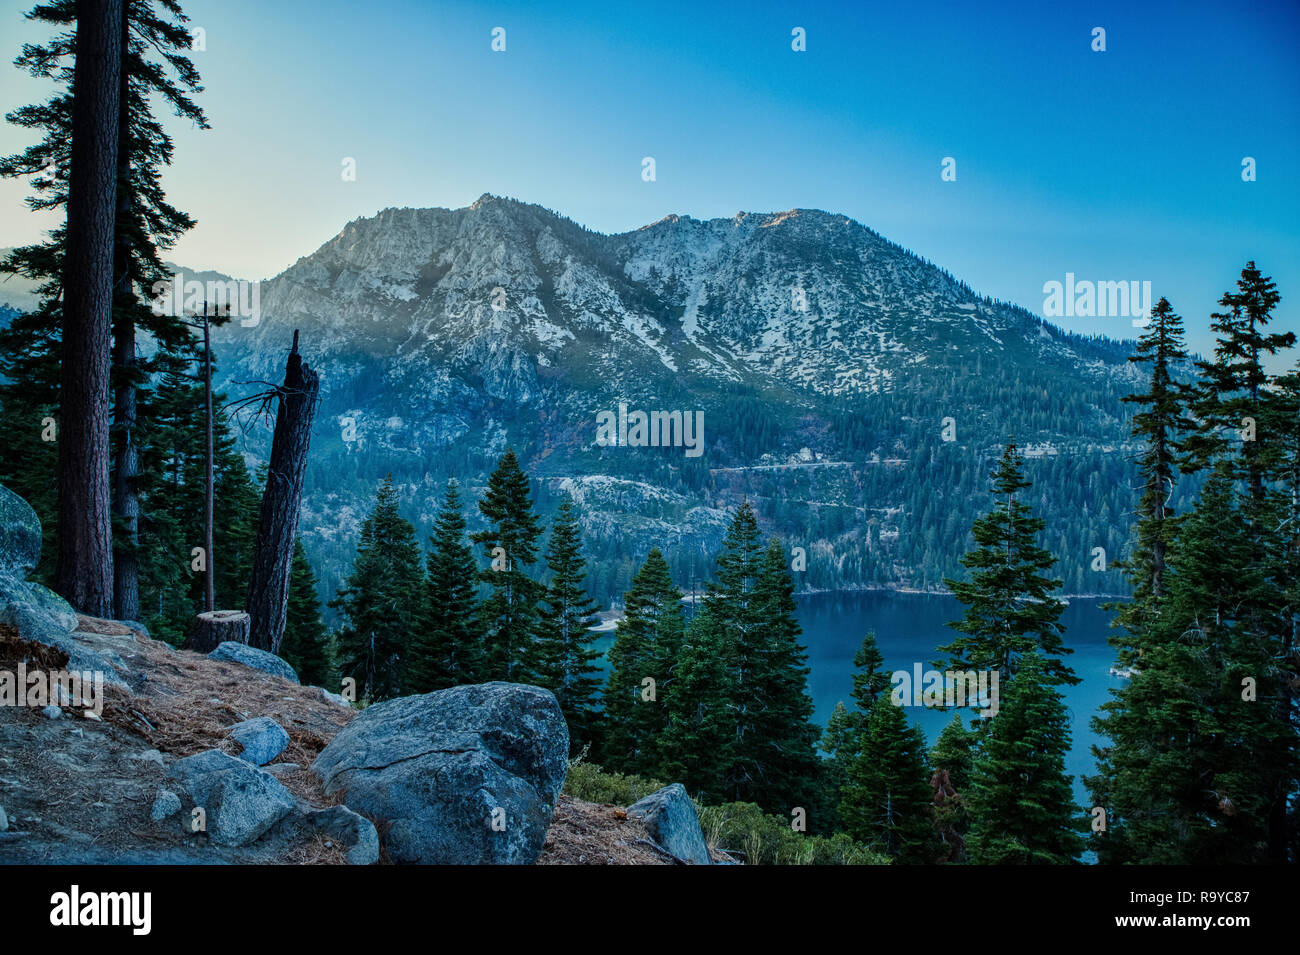 Stunning view of Jakes Peak towering above Emerald Bay at sunset from Inspiration Point scenic overlook, South Lake Tahoe, California Stock Photo